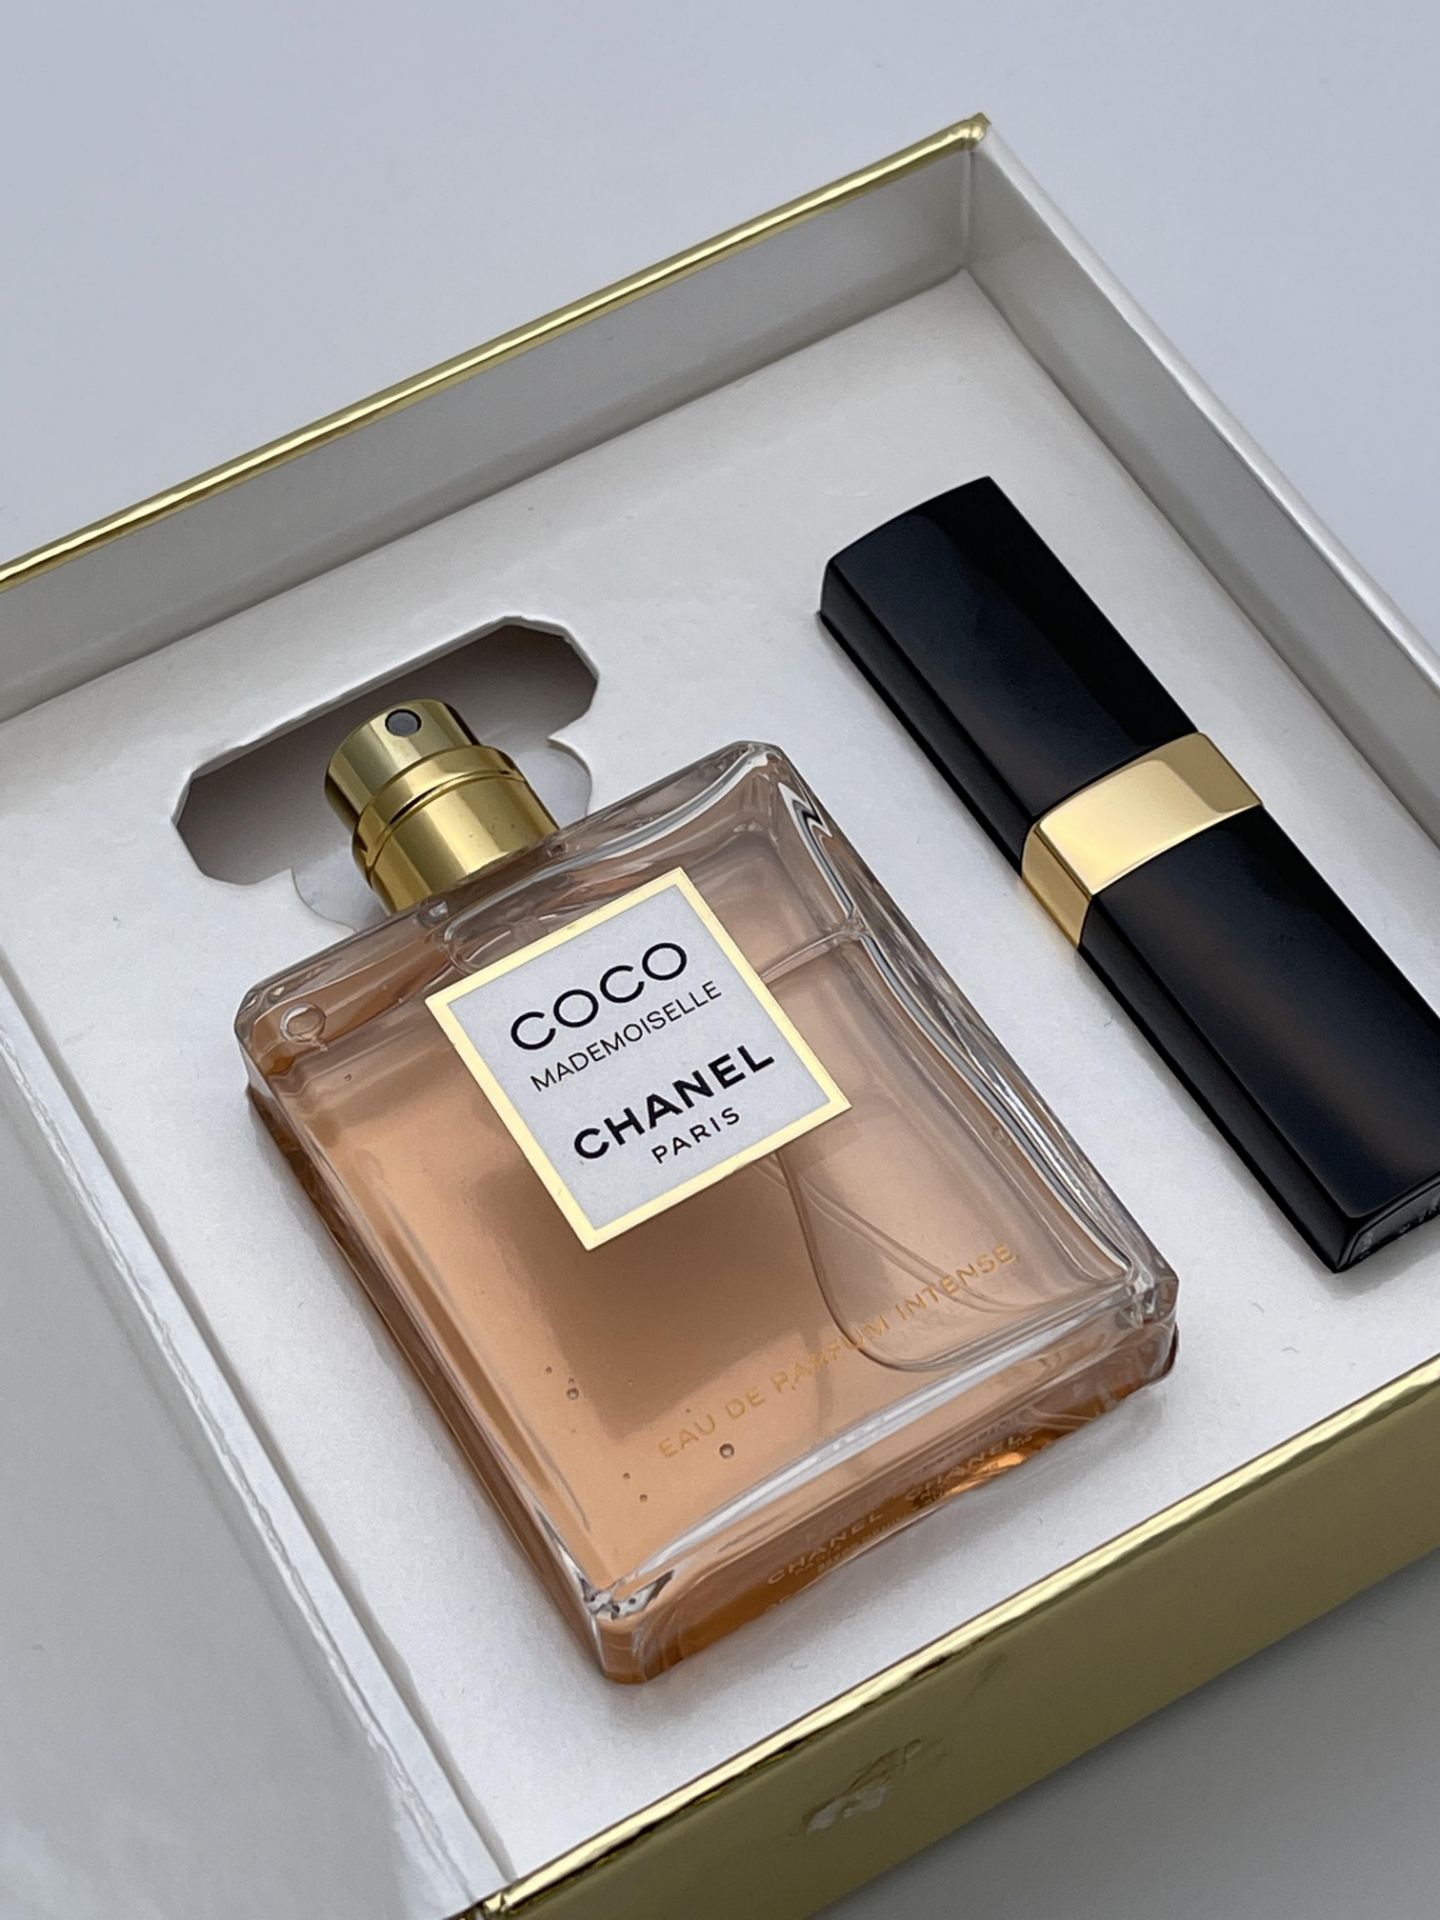 BOXED COCO MADEMOISELLE CHANEL PARIS COLLECTION COCO, INCLUDES 35ML EAU DE PARFUM AND ROUGE COCO - Image 2 of 3